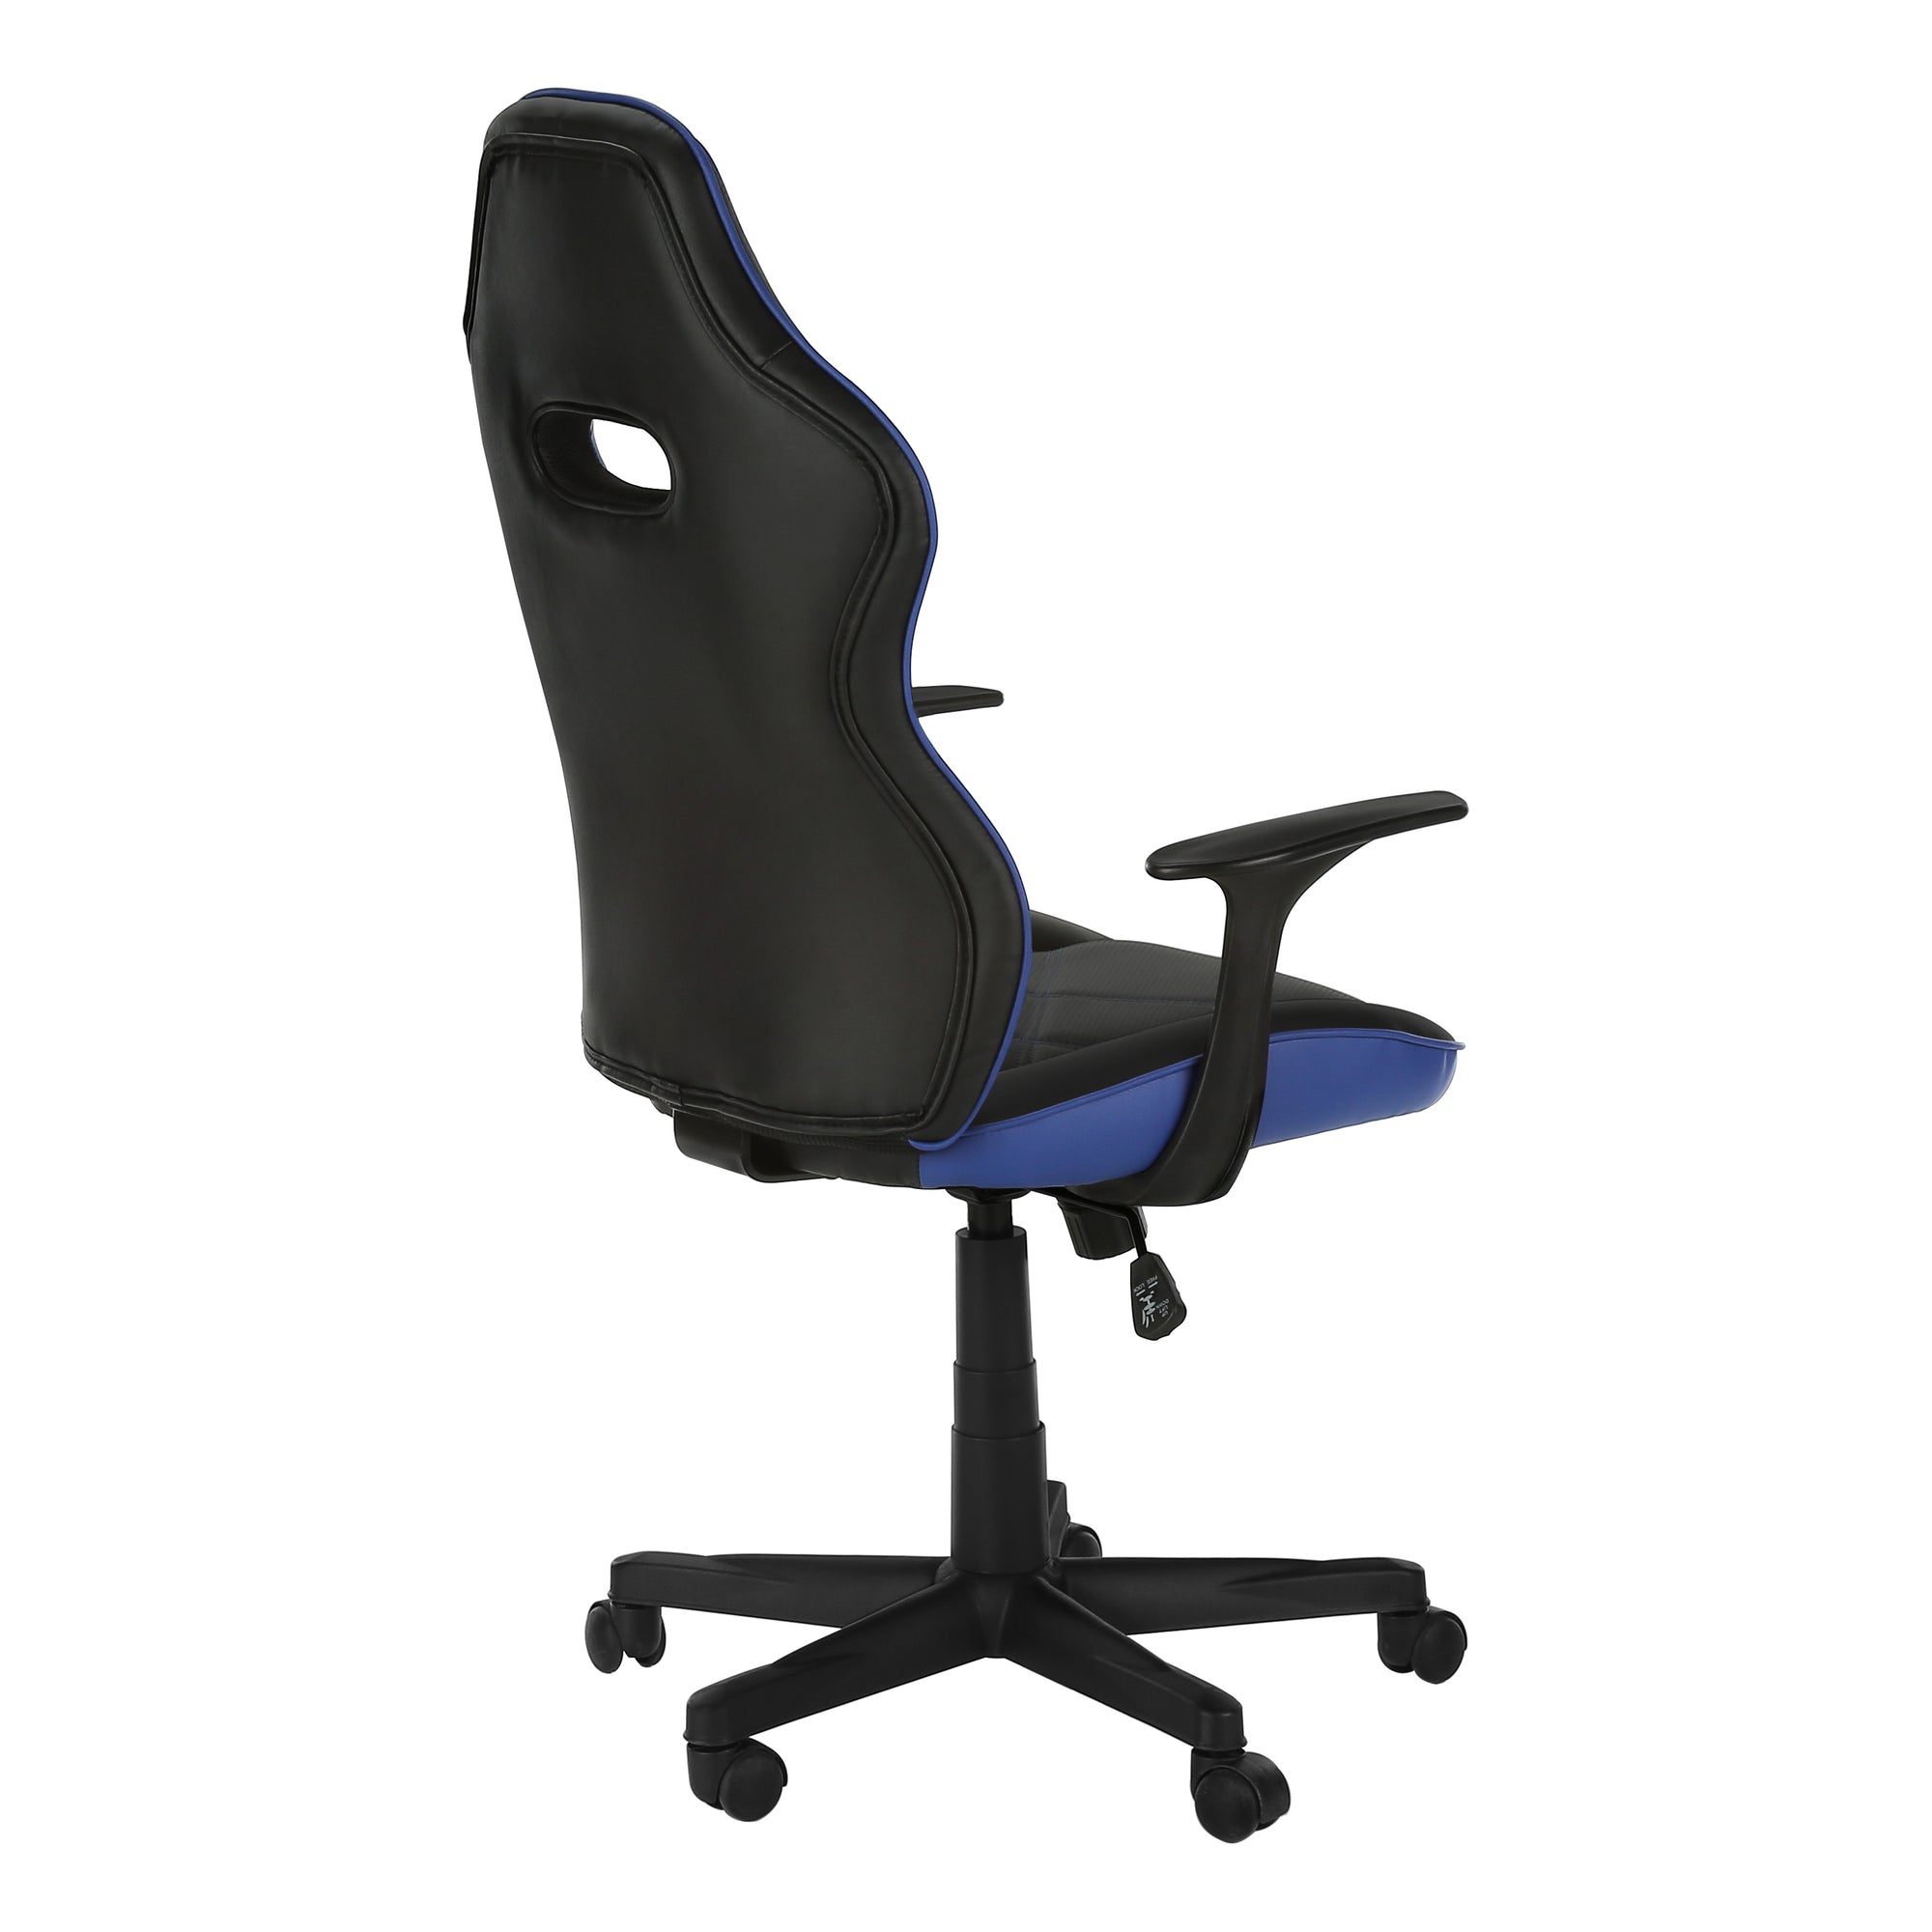 MN-277328    Office Chair - Gaming / Black / Blue Leather-Look